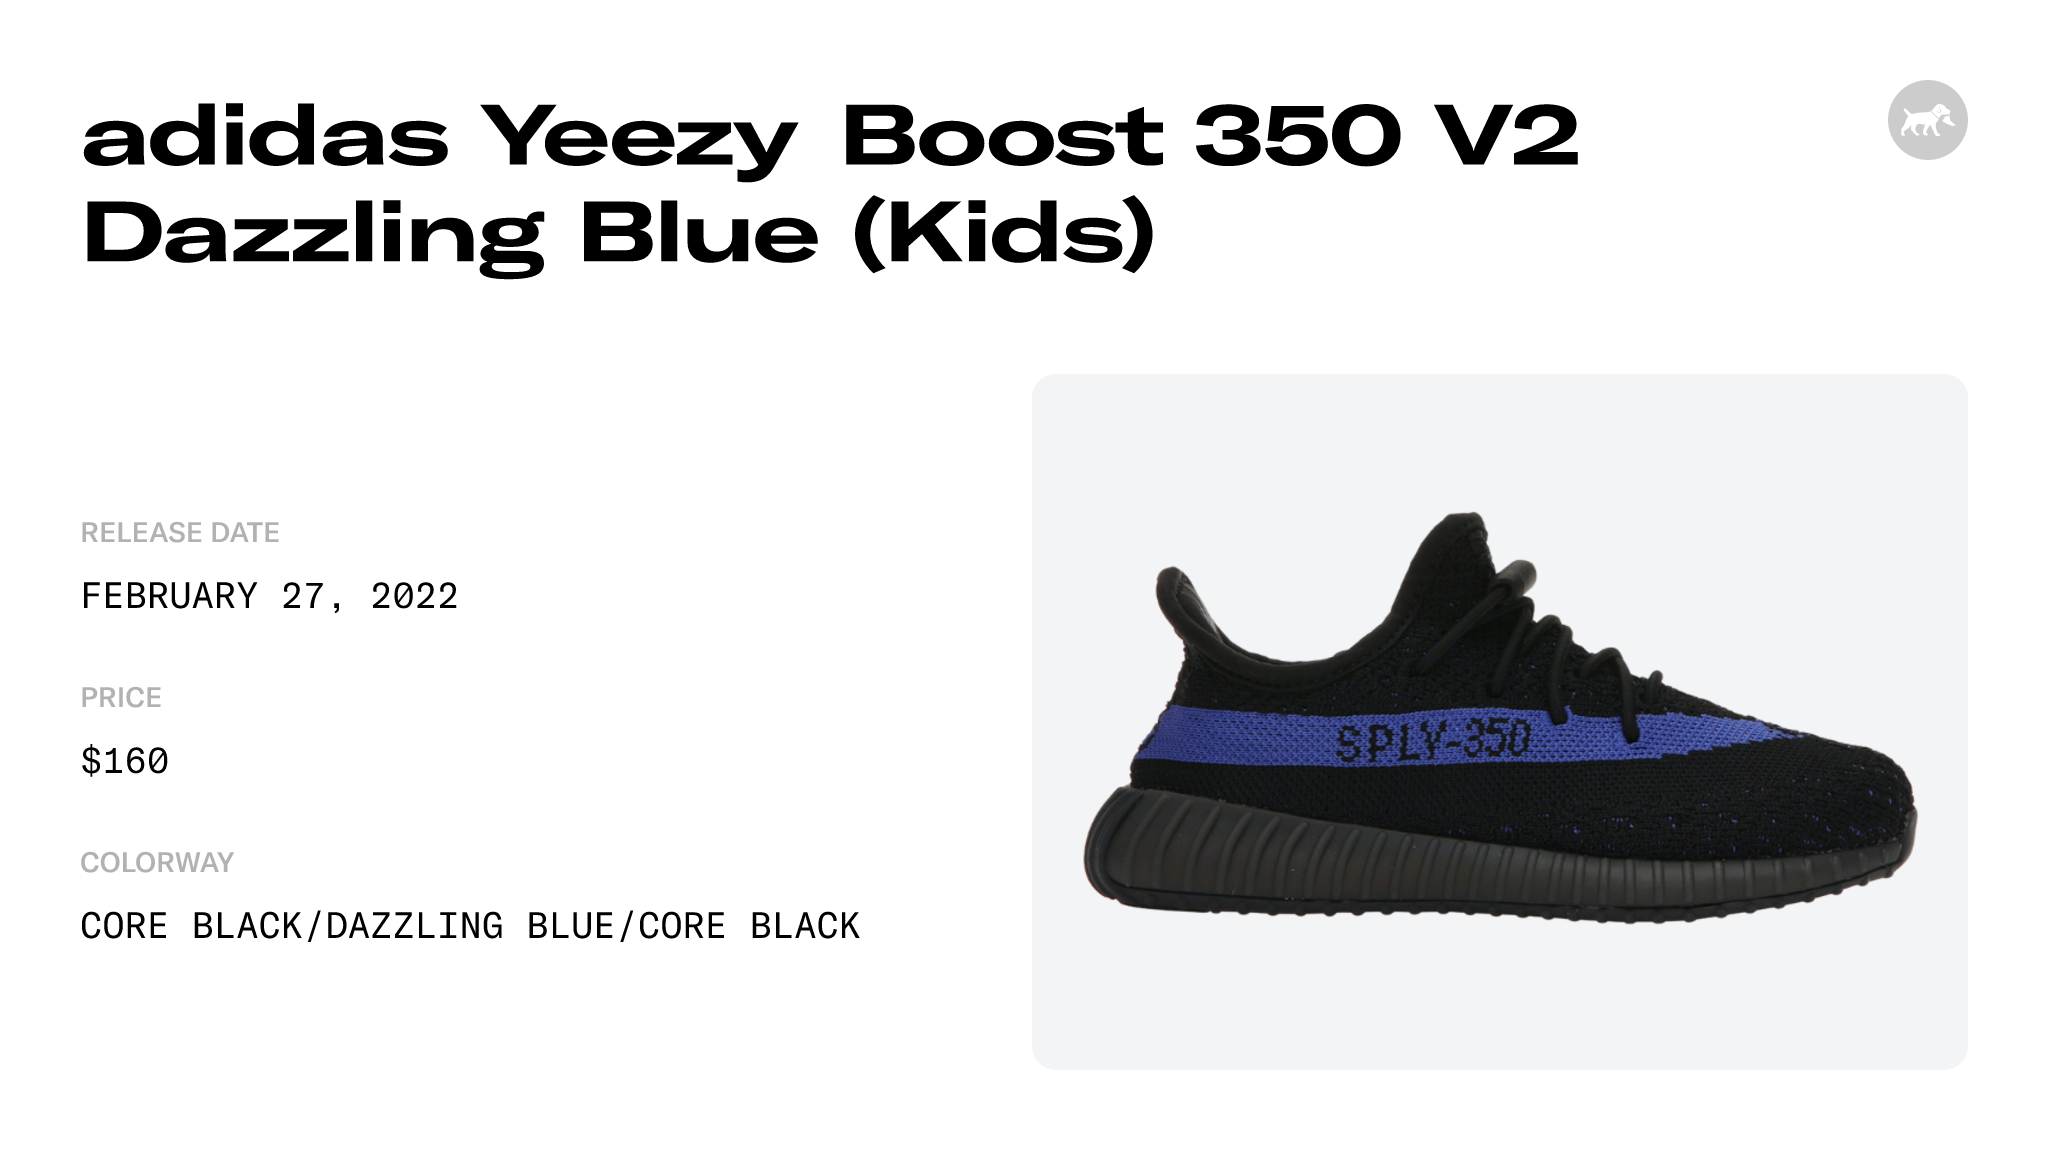 adidas Yeezy Boost 350 V2 Dazzling Blue (Kids) - GY7165 Raffles and Release  Date